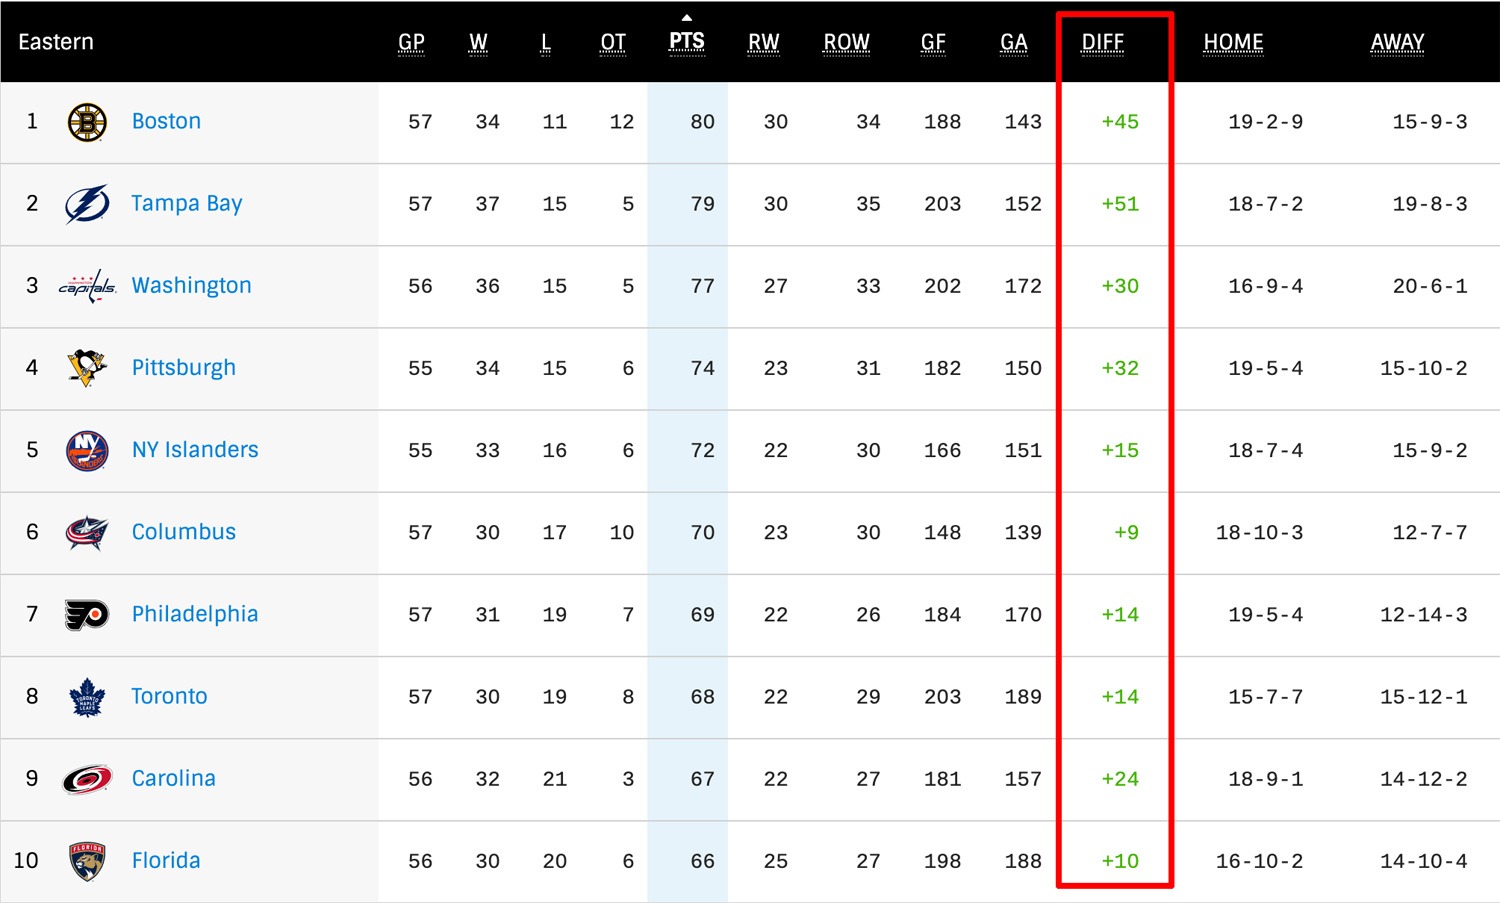 nhl standings now